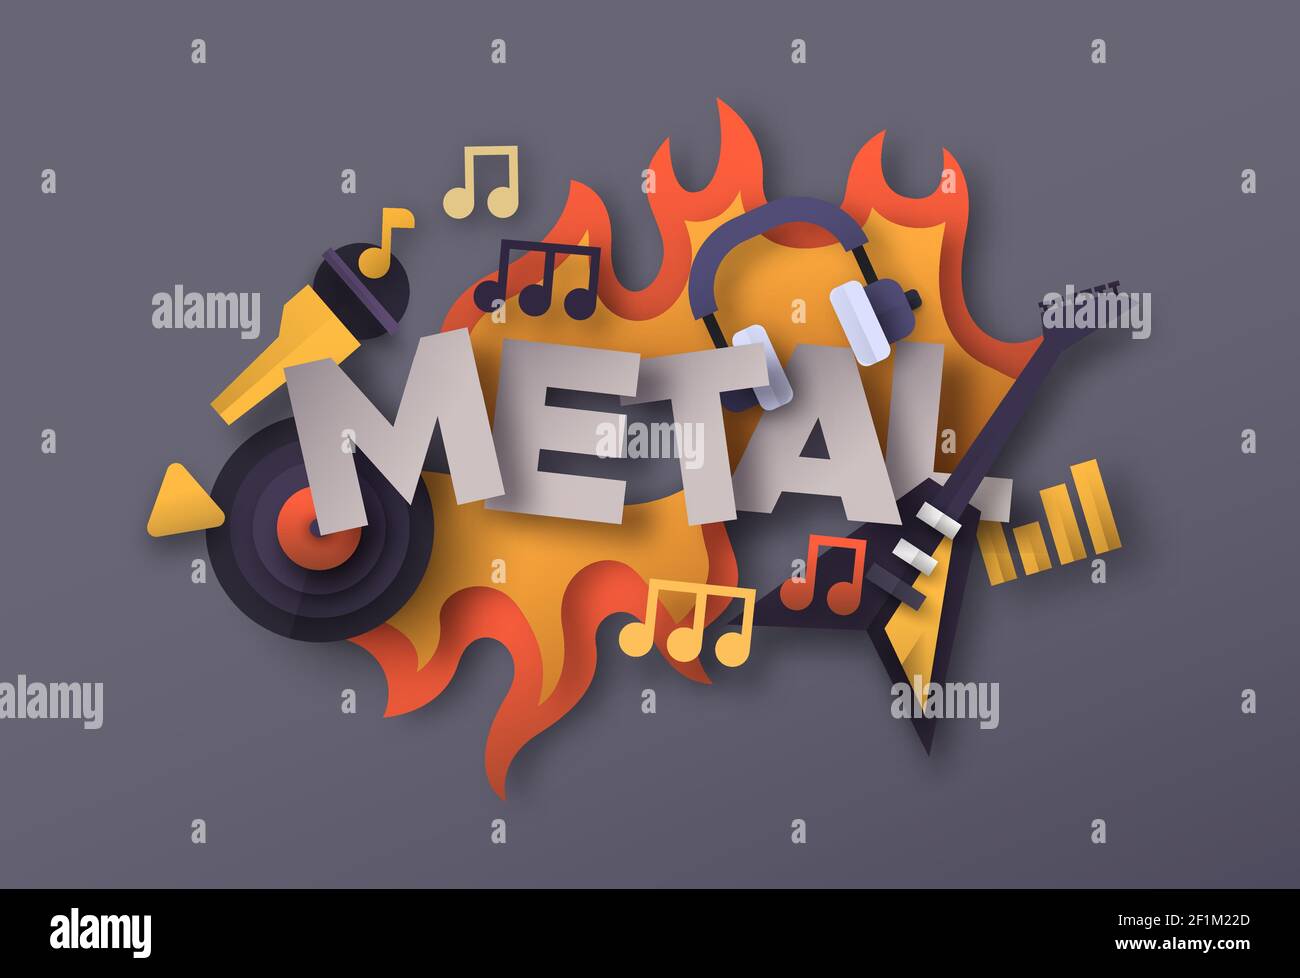 Heavy Metal music style illustration with 3d paper cut musical equipment icons. Hard rock band festival or concert event concept. Includes microphone, Stock Vector